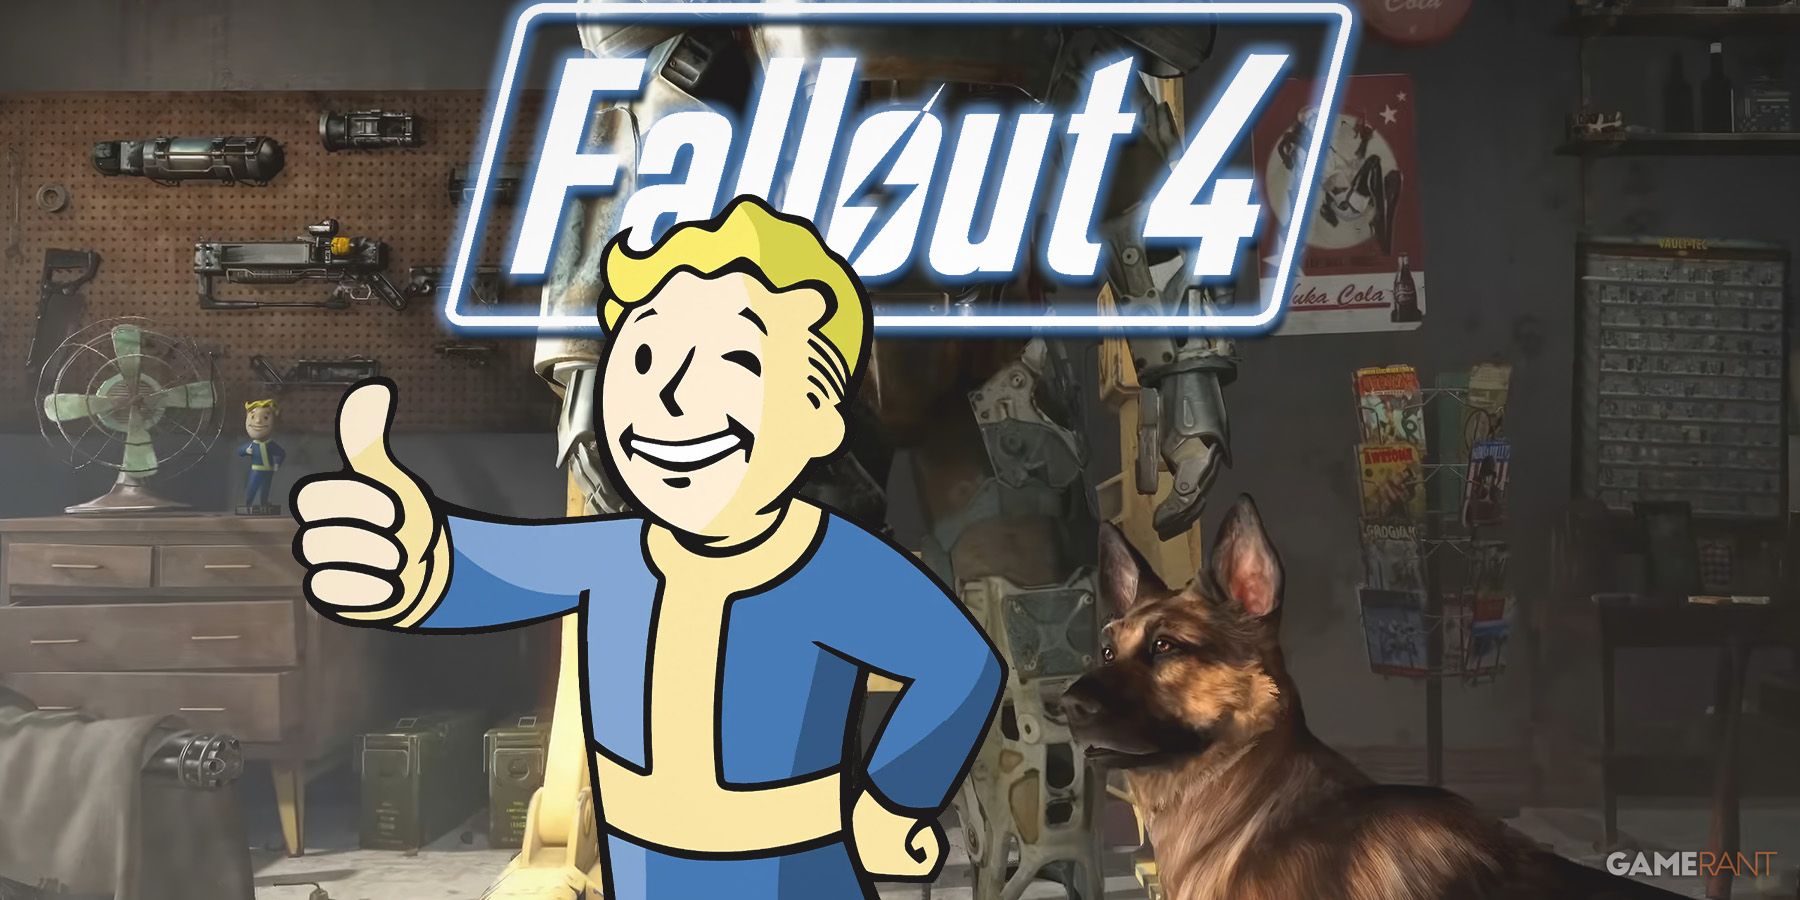 Fallout 4 Dogmeat looking at Vault Boy giving thumbs up in front of game logo and power armor garage composite